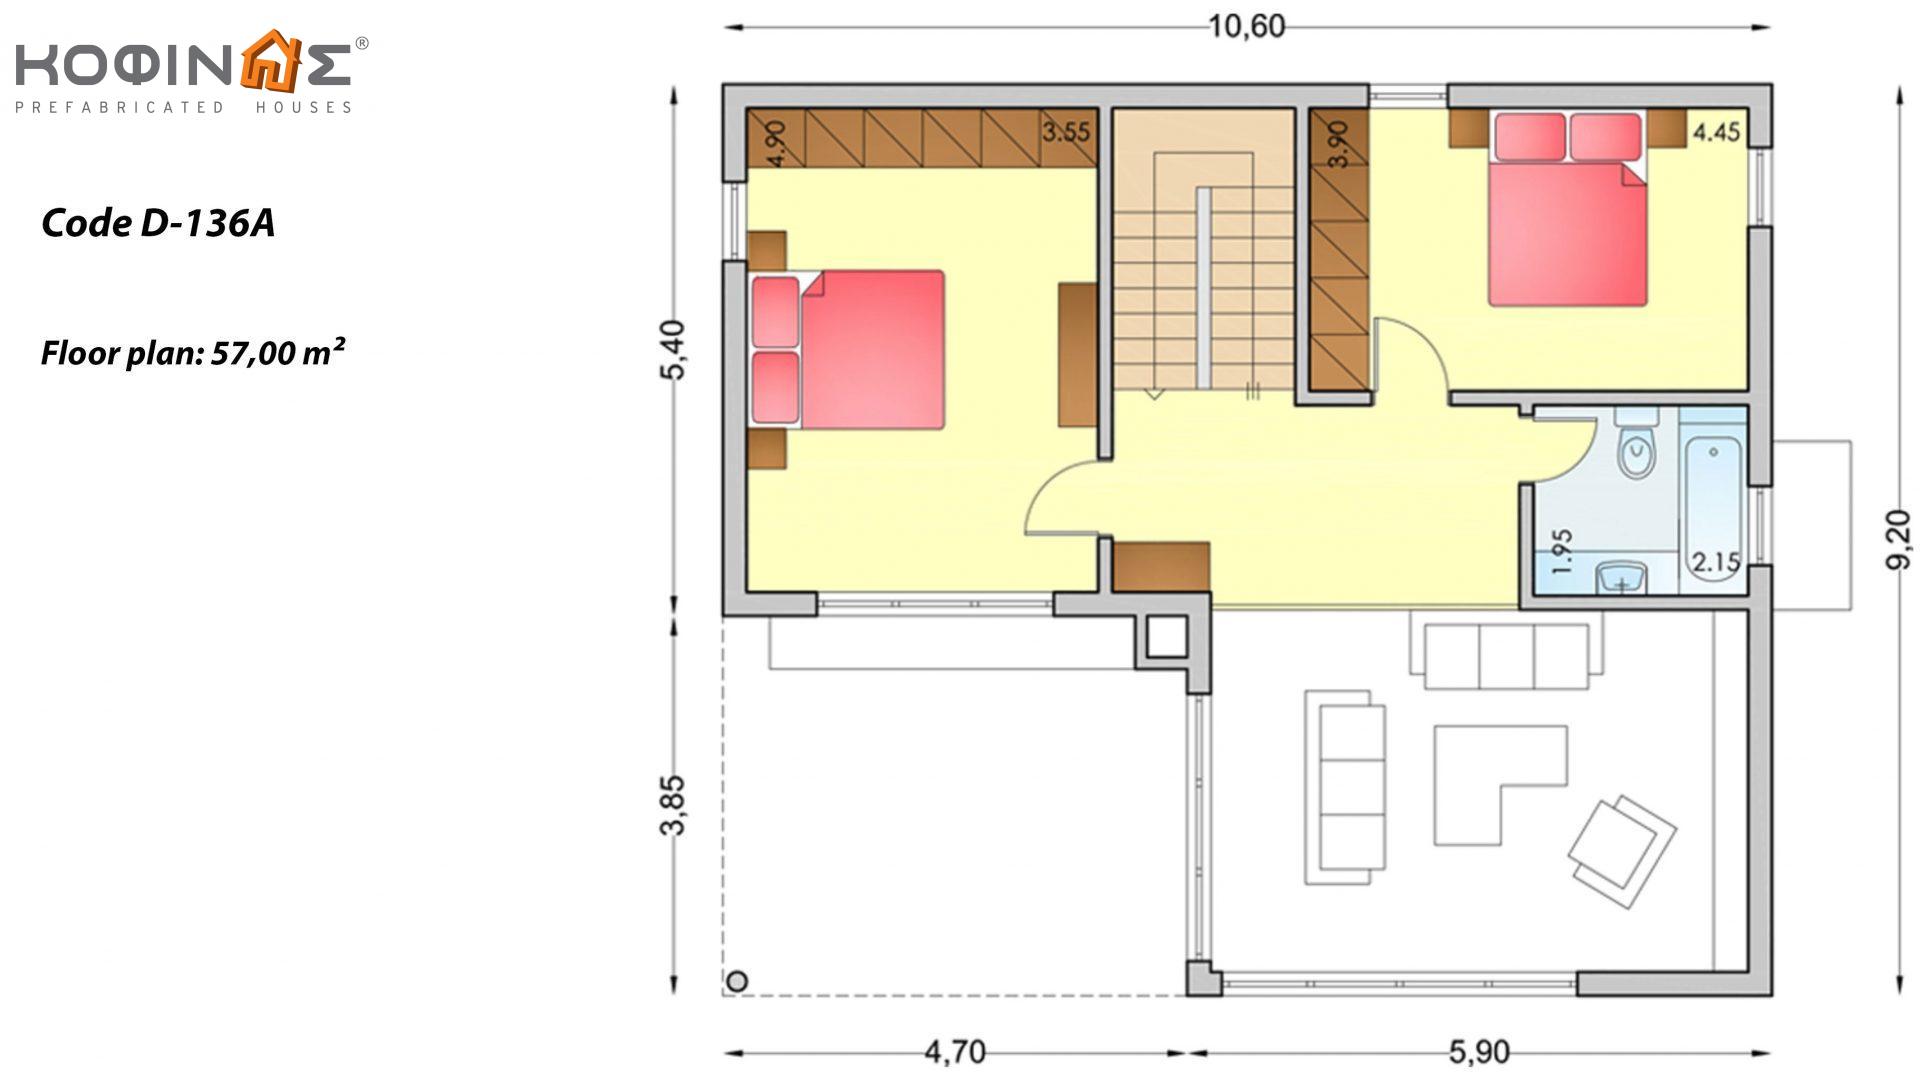 2-story house D-136a, total surface of 136,72 m²,covered roofed areas 19.40 m²